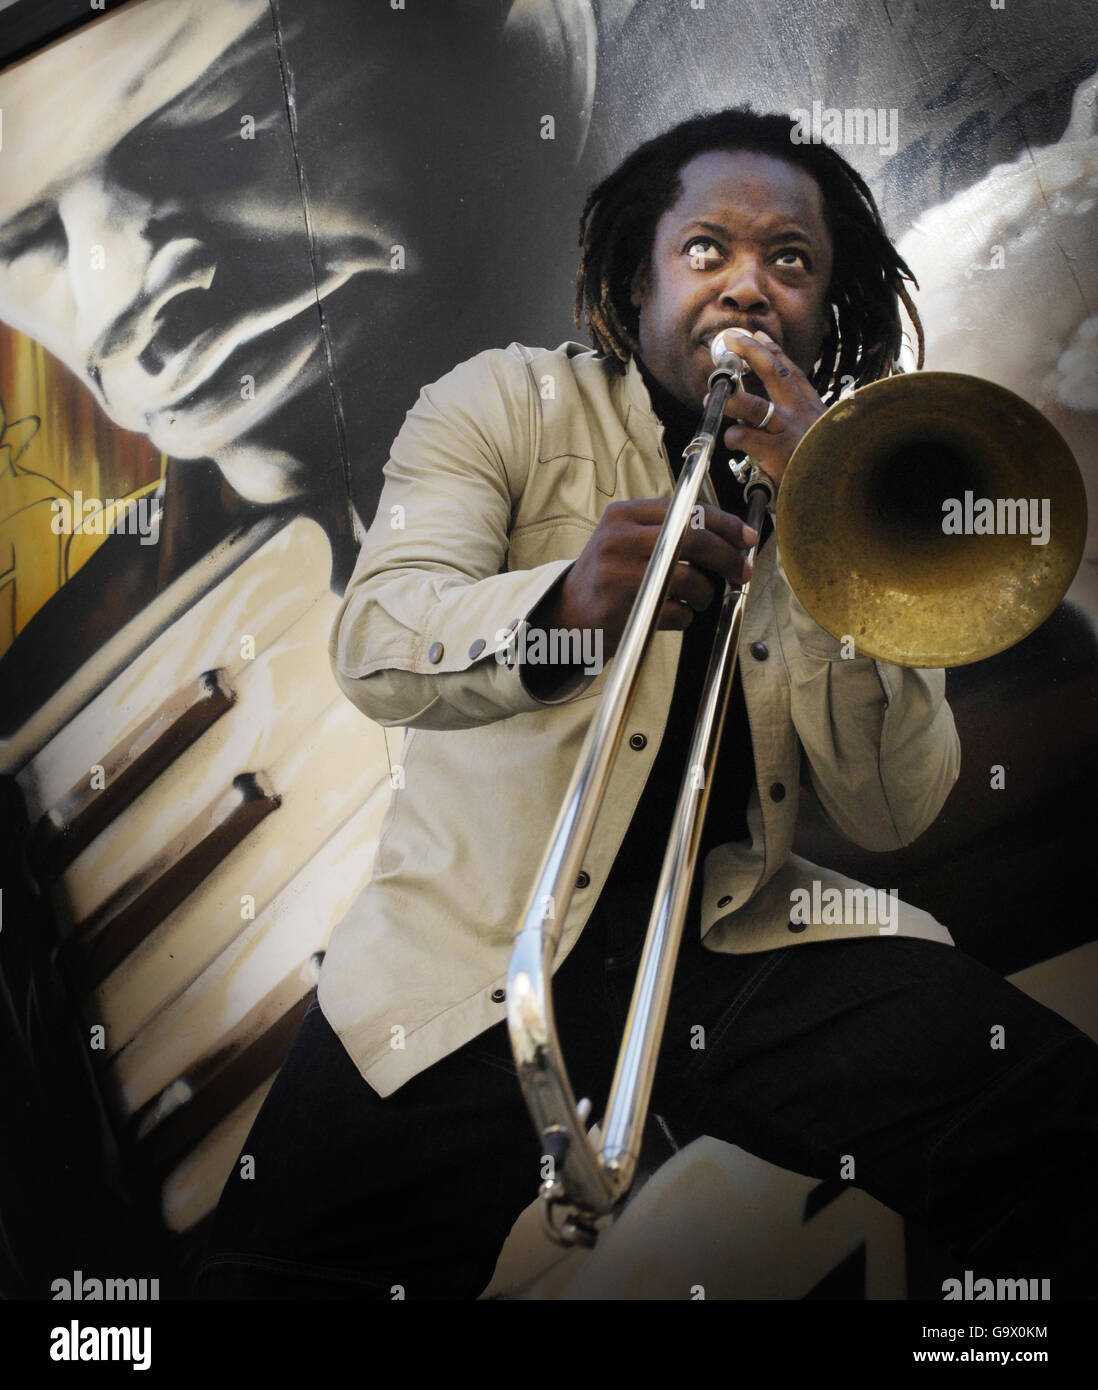 Guest Program Director, Dennis Rollins plays his trombone in Glasgow city centre during the launch of the 21st Glasgow International Jazz Festival. Stock Photo